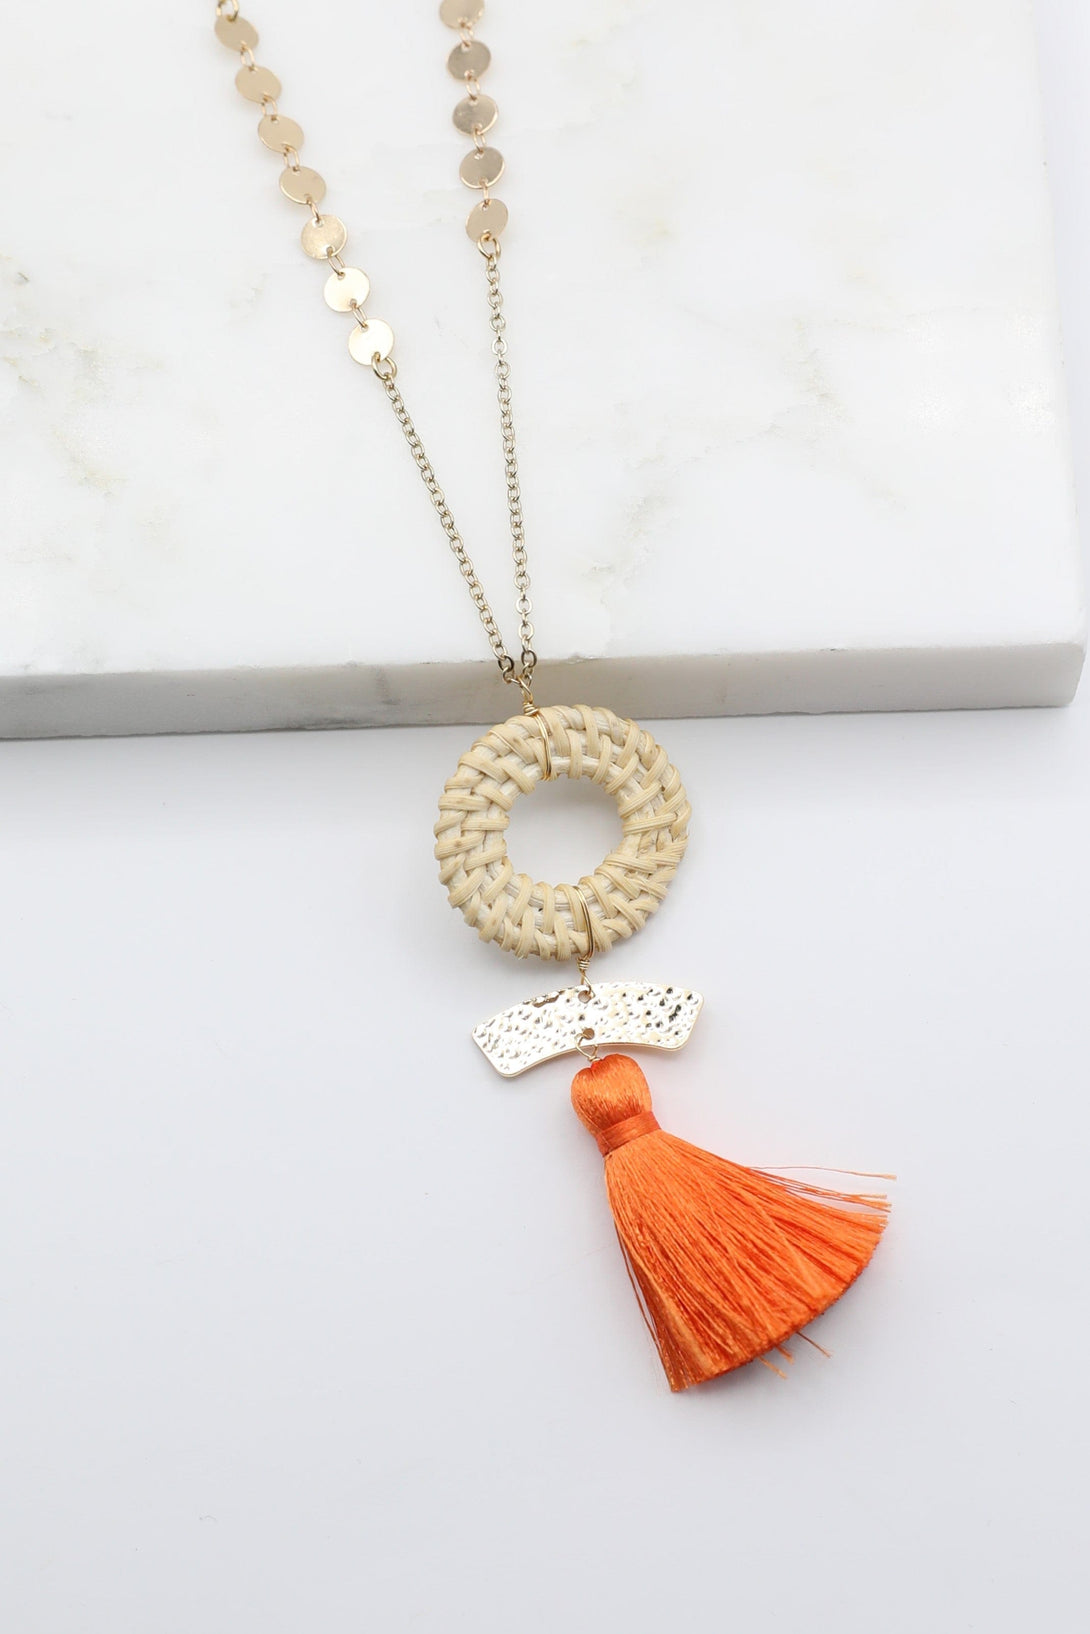 Long Disk Chain Necklace with Woven Circle, Gold Bar and Tassel